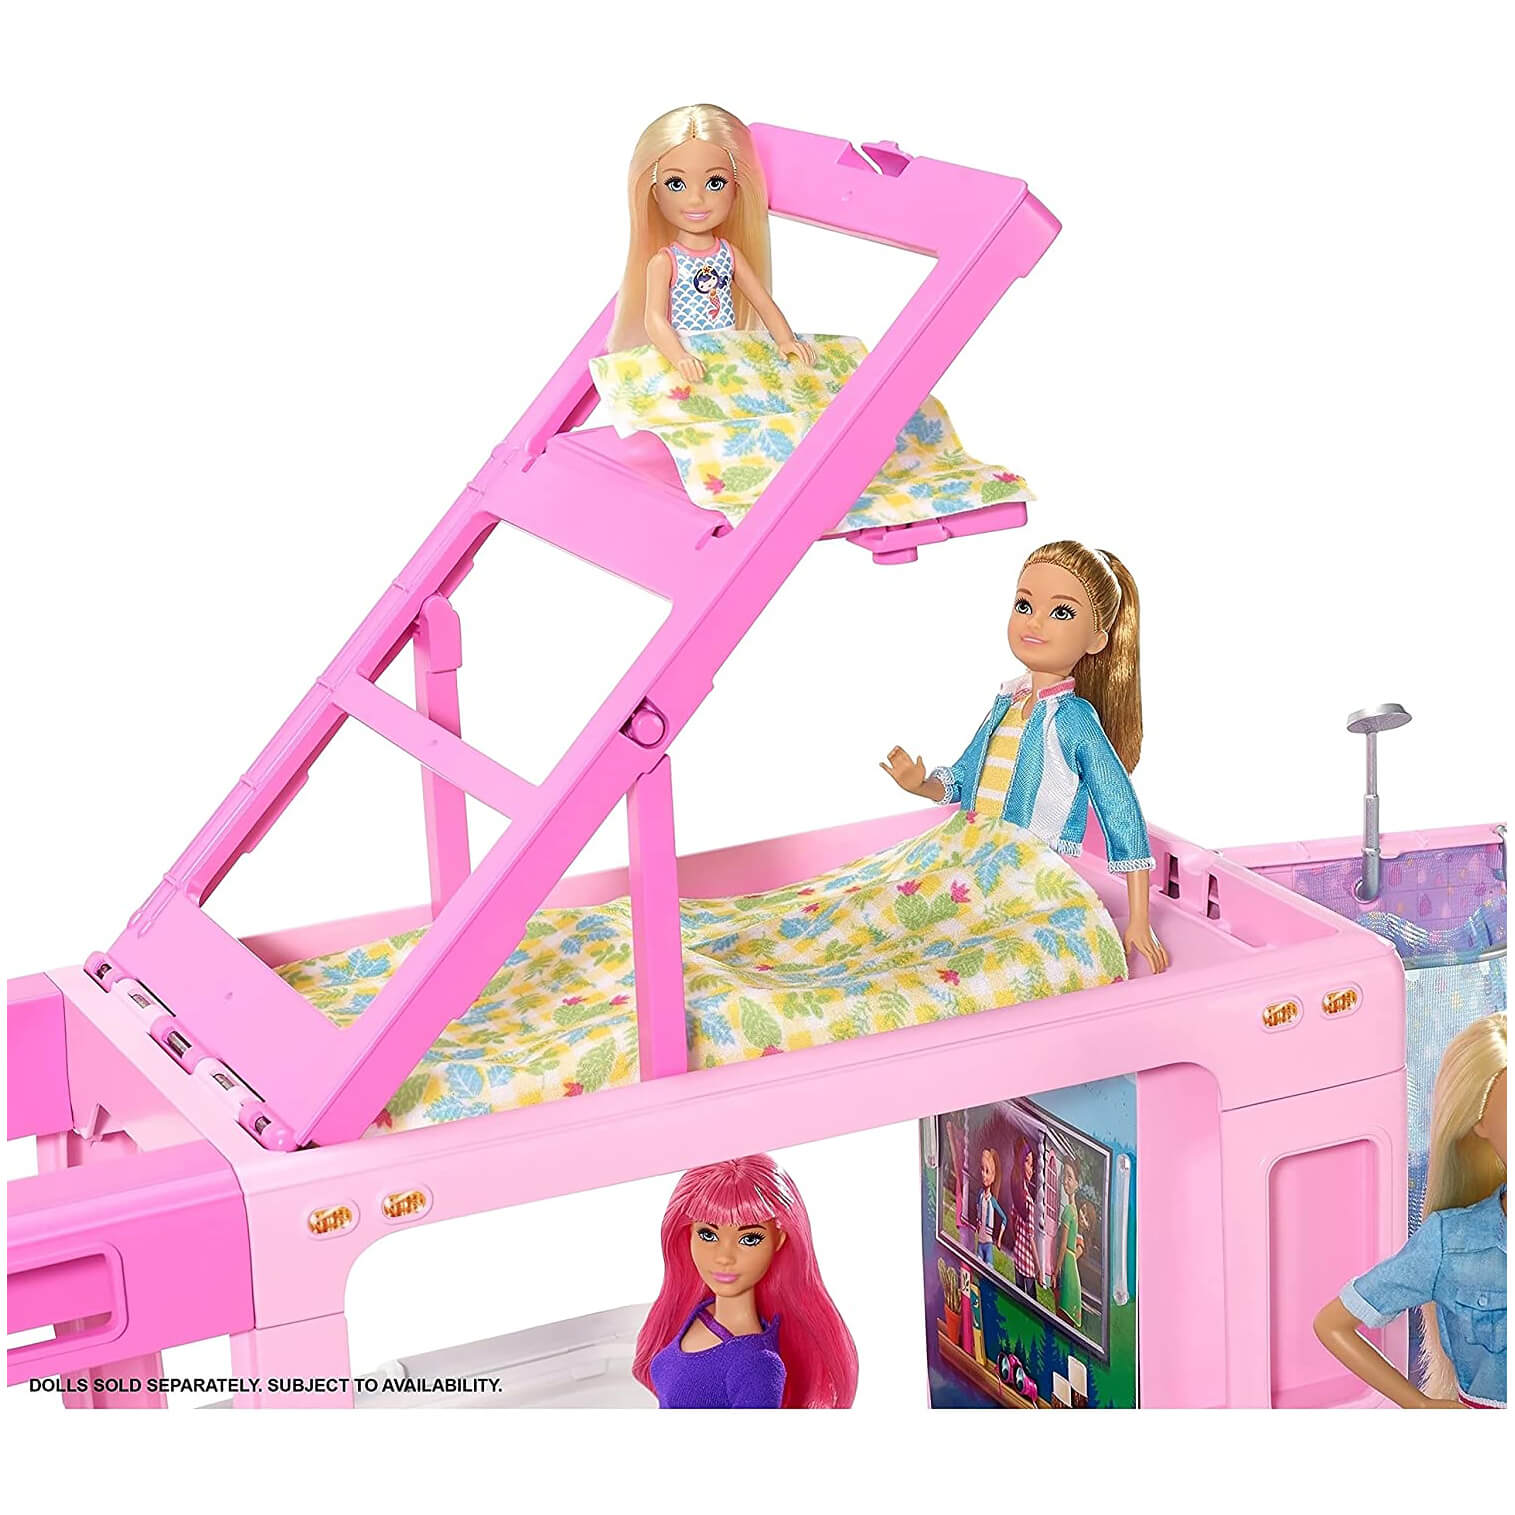 Mattel Barbie 3-in-1 DreamCamper Vehicle and Accessories Playset